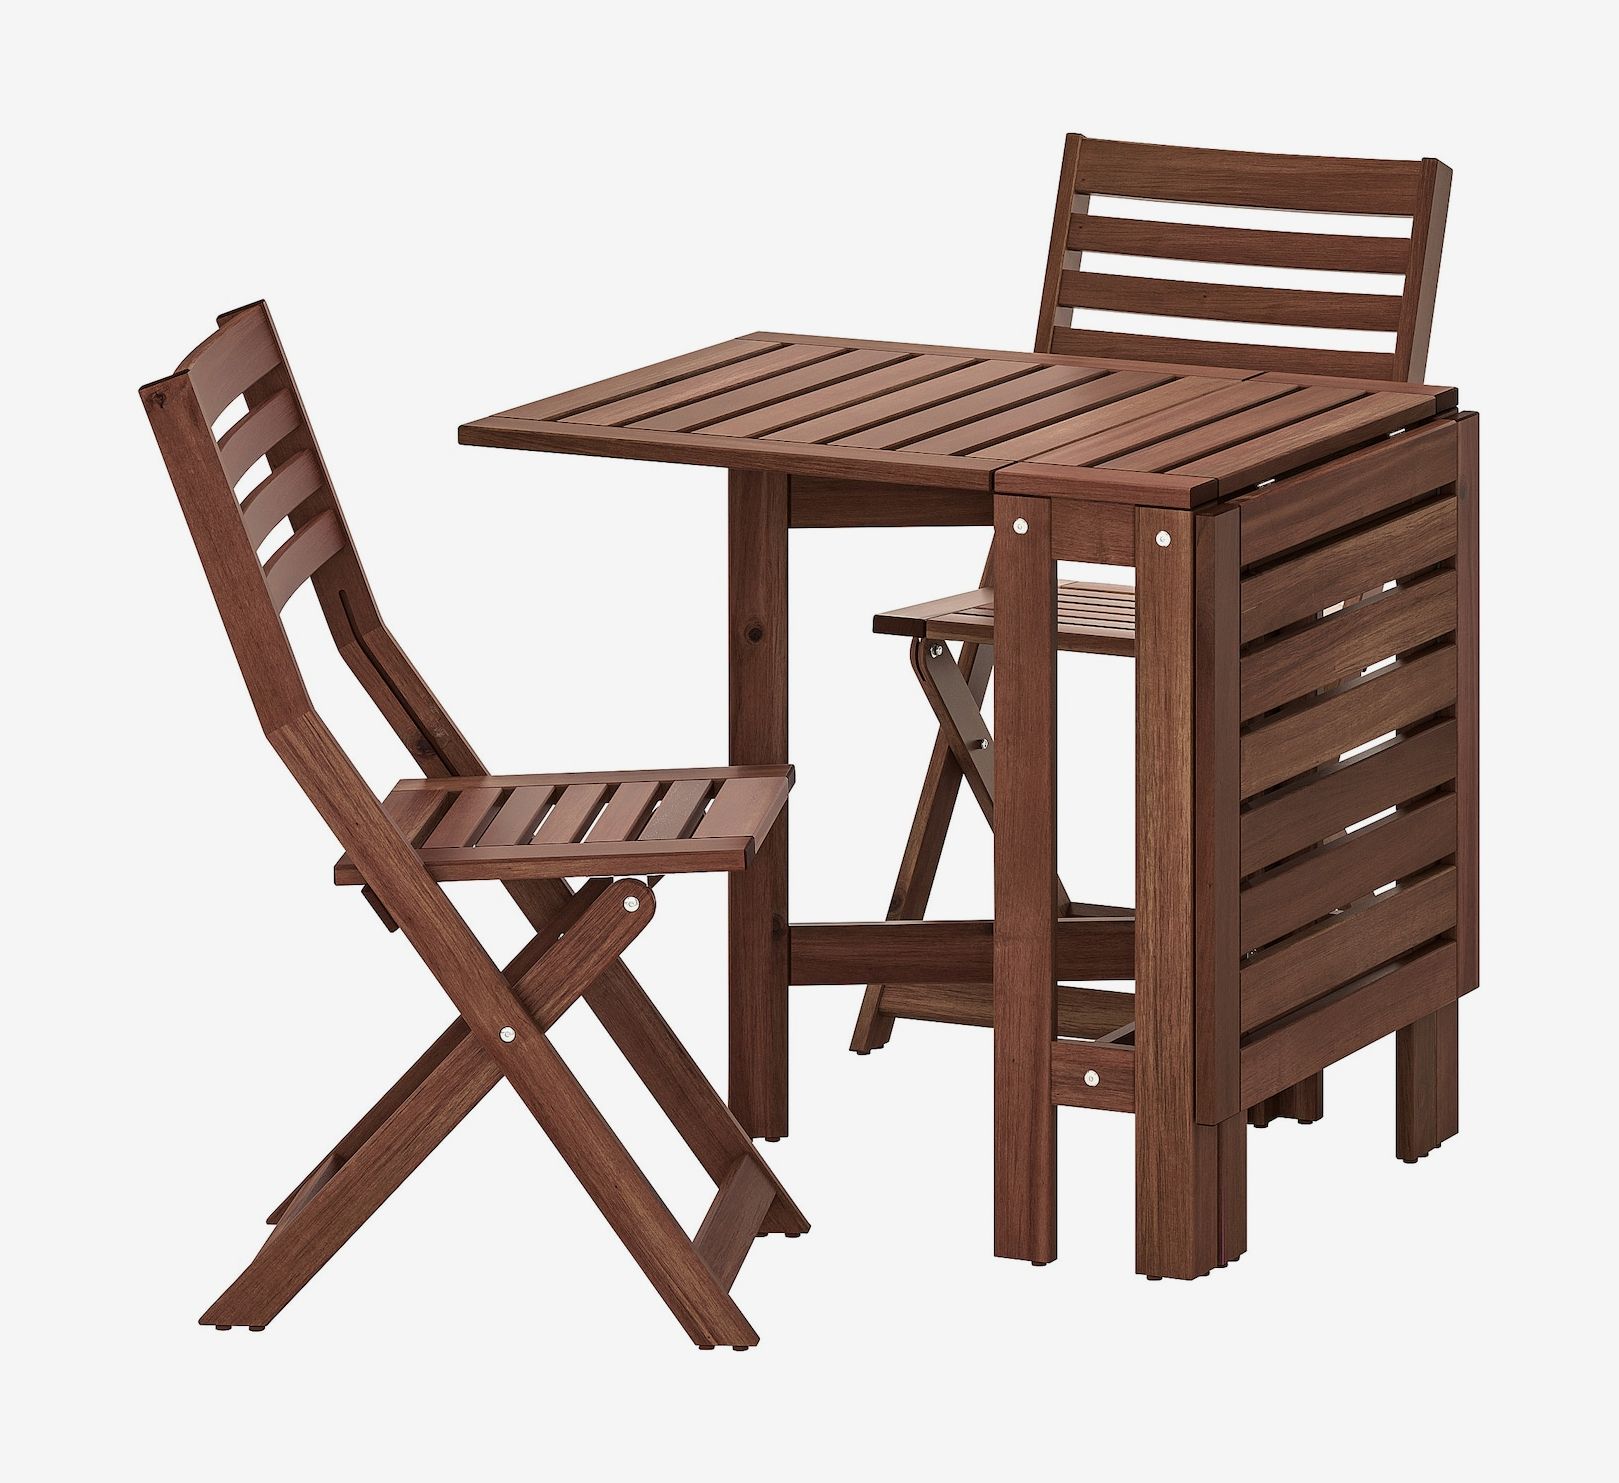 The Best Outdoor Patio Dining Sets 2020, Best Patio Dining Sets Under 1000